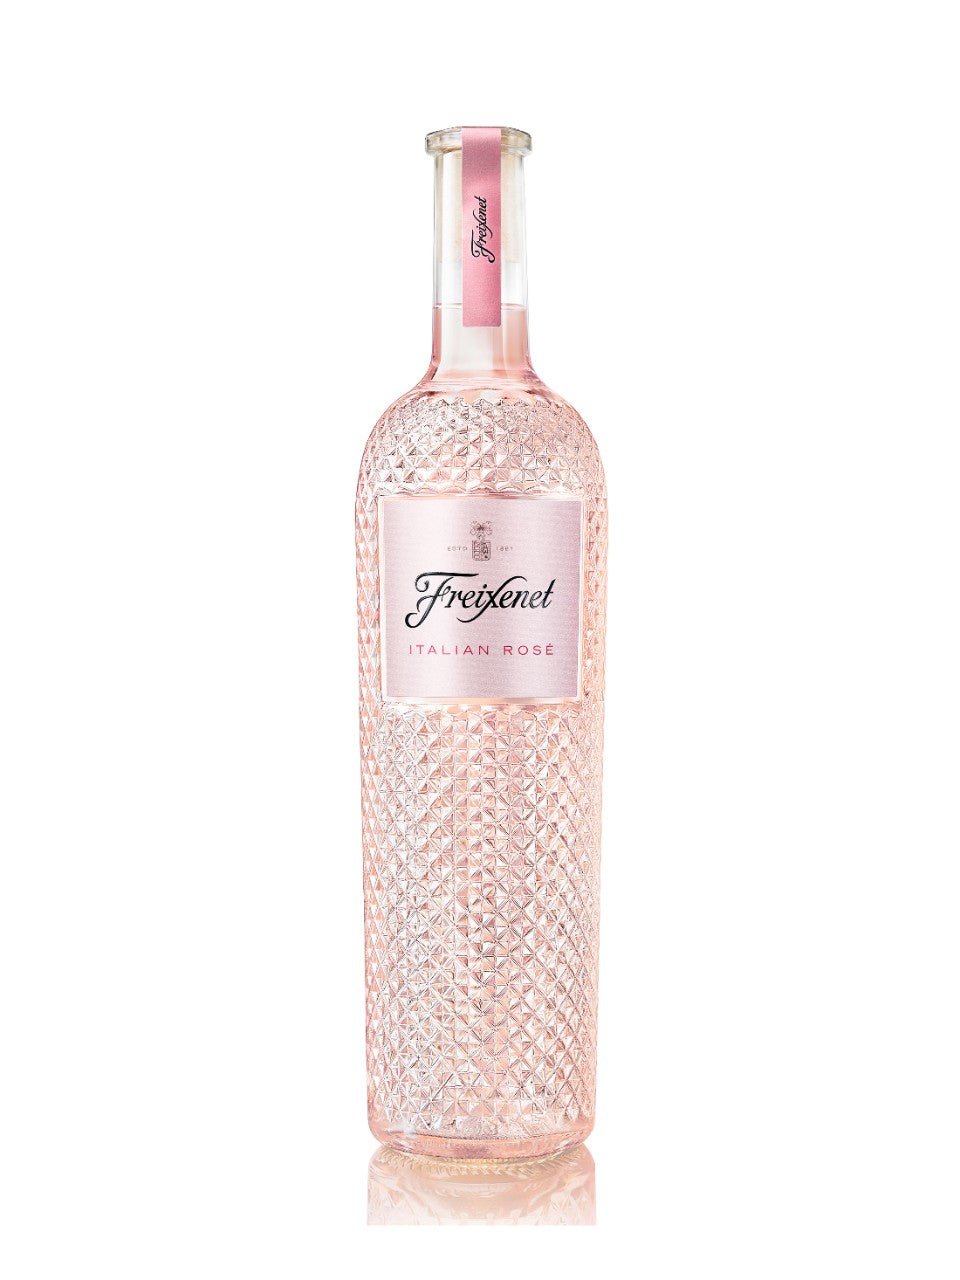 Freixenet Rose IGT | Exquisite Wine & Alcohol Gift Delivery Toronto Canada | Vyno